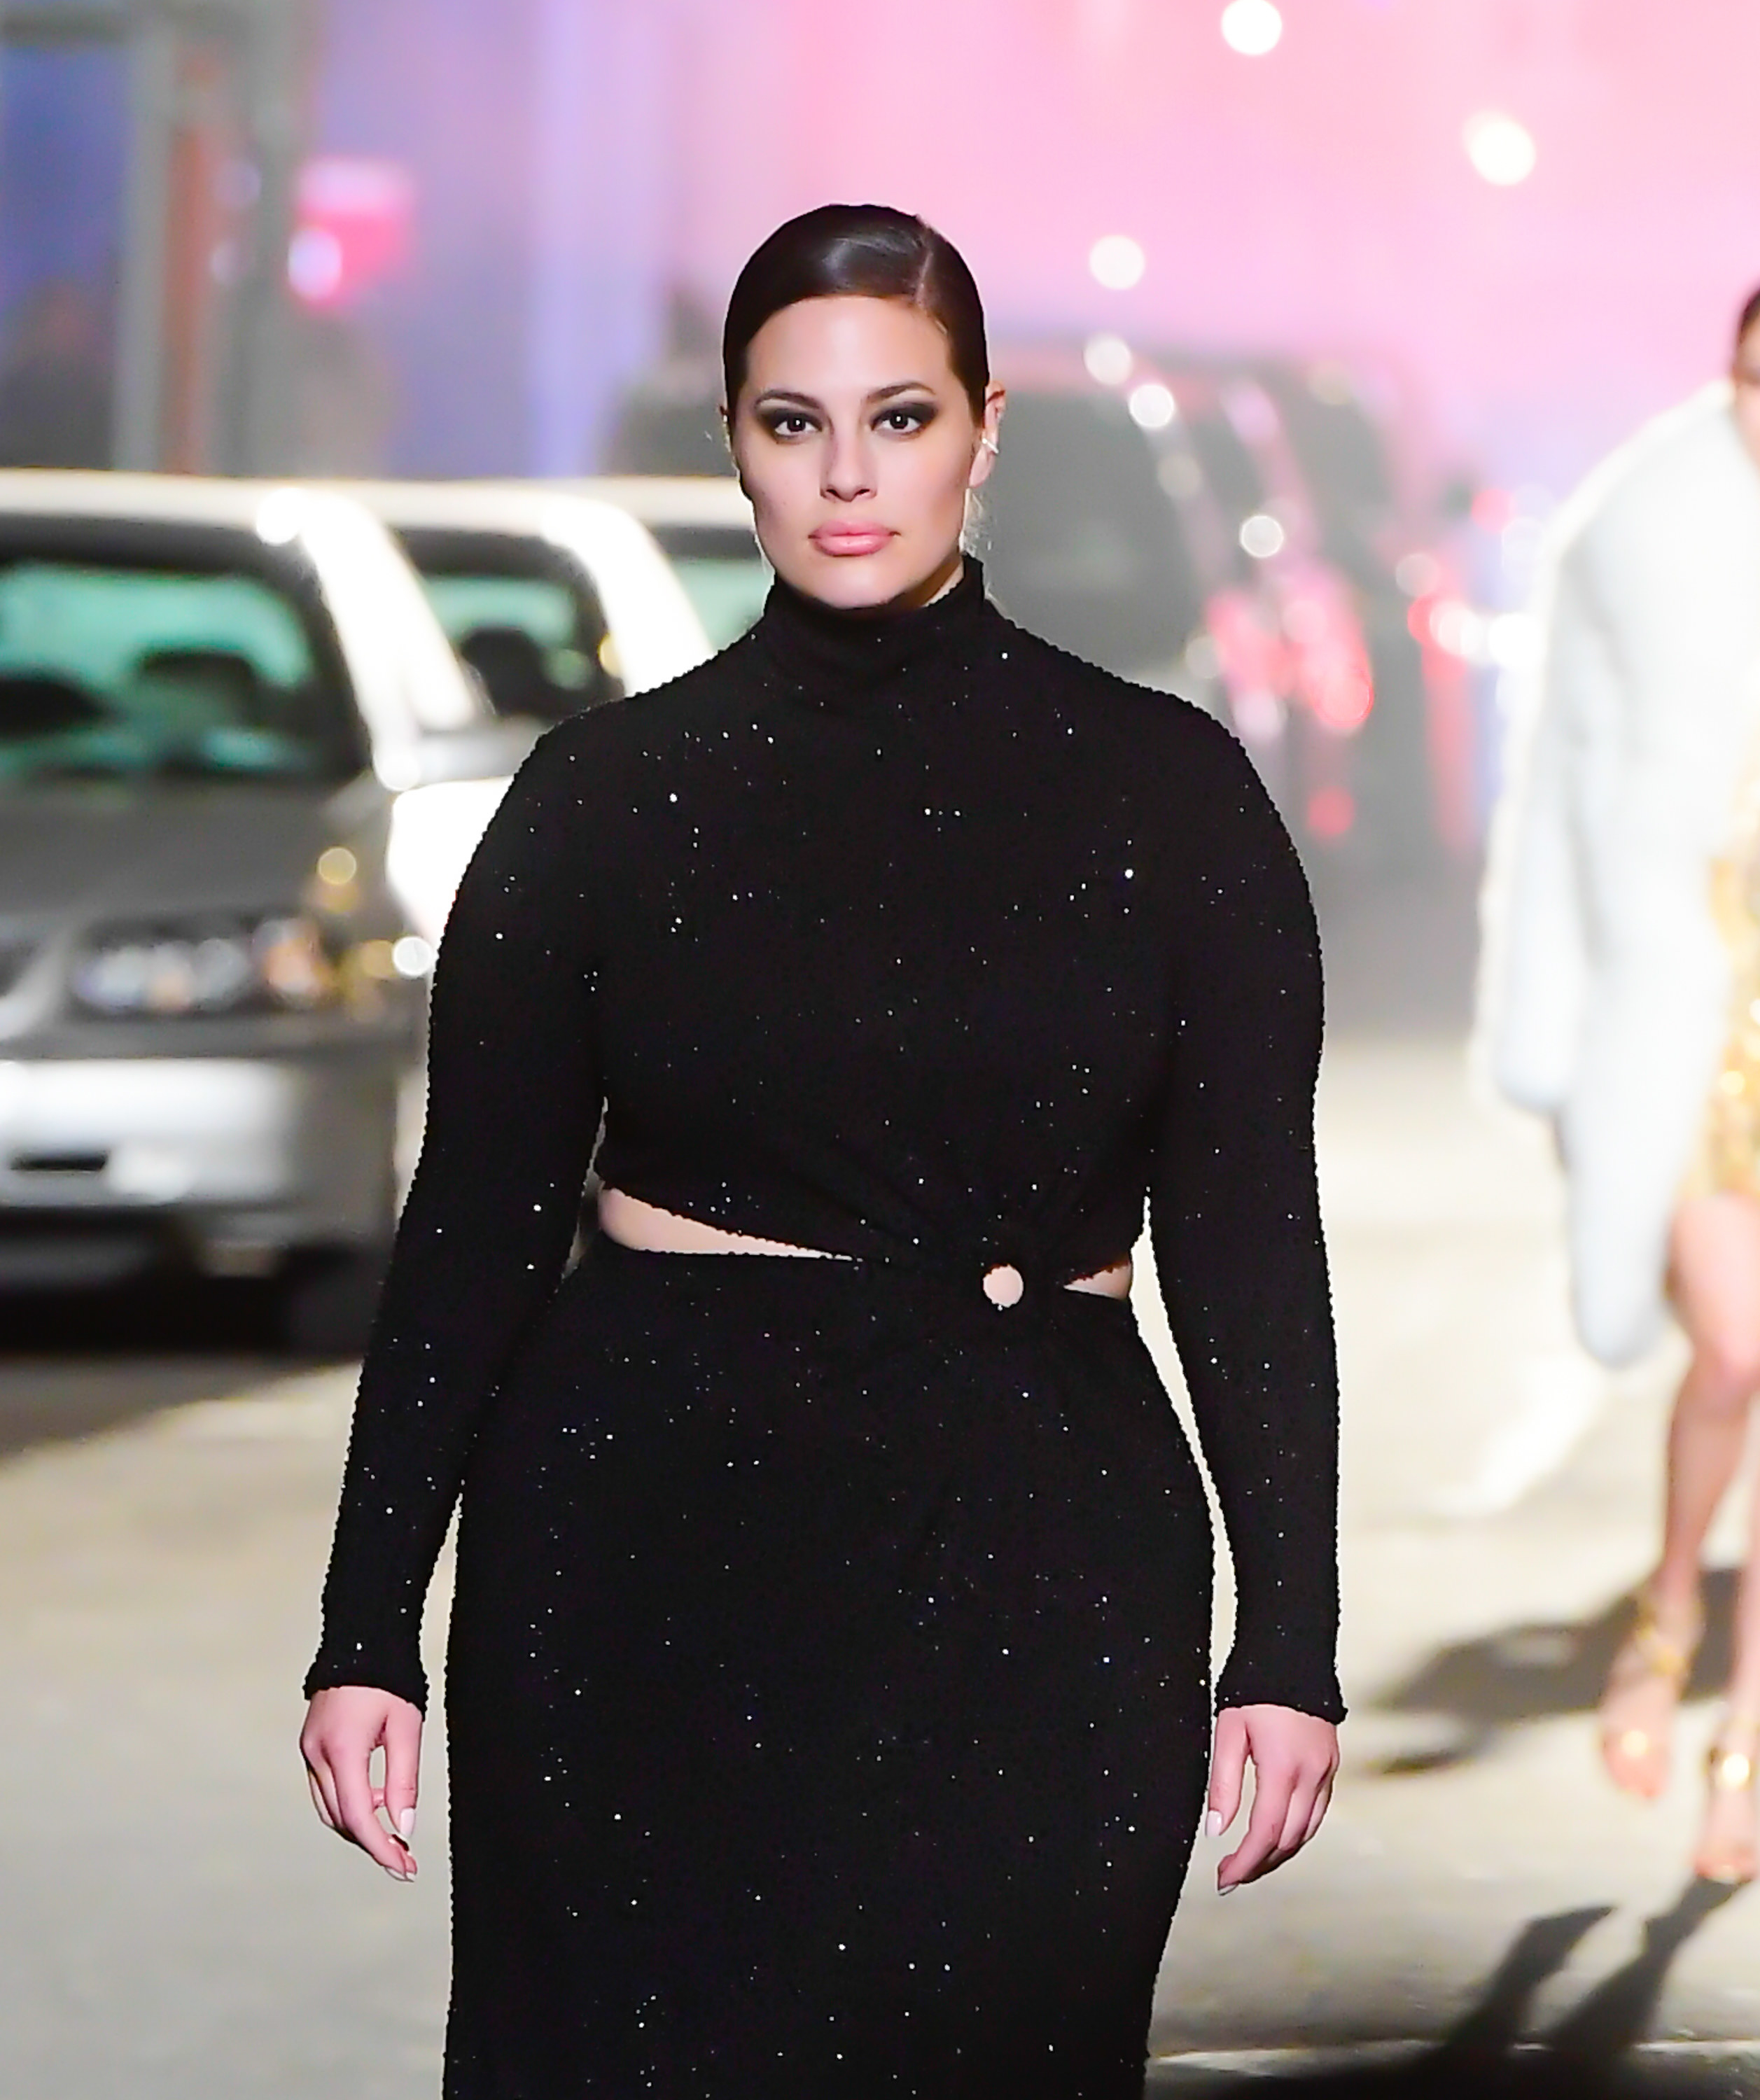 Ashley Graham walks for the Michael Kors Fashion Show in April 2021